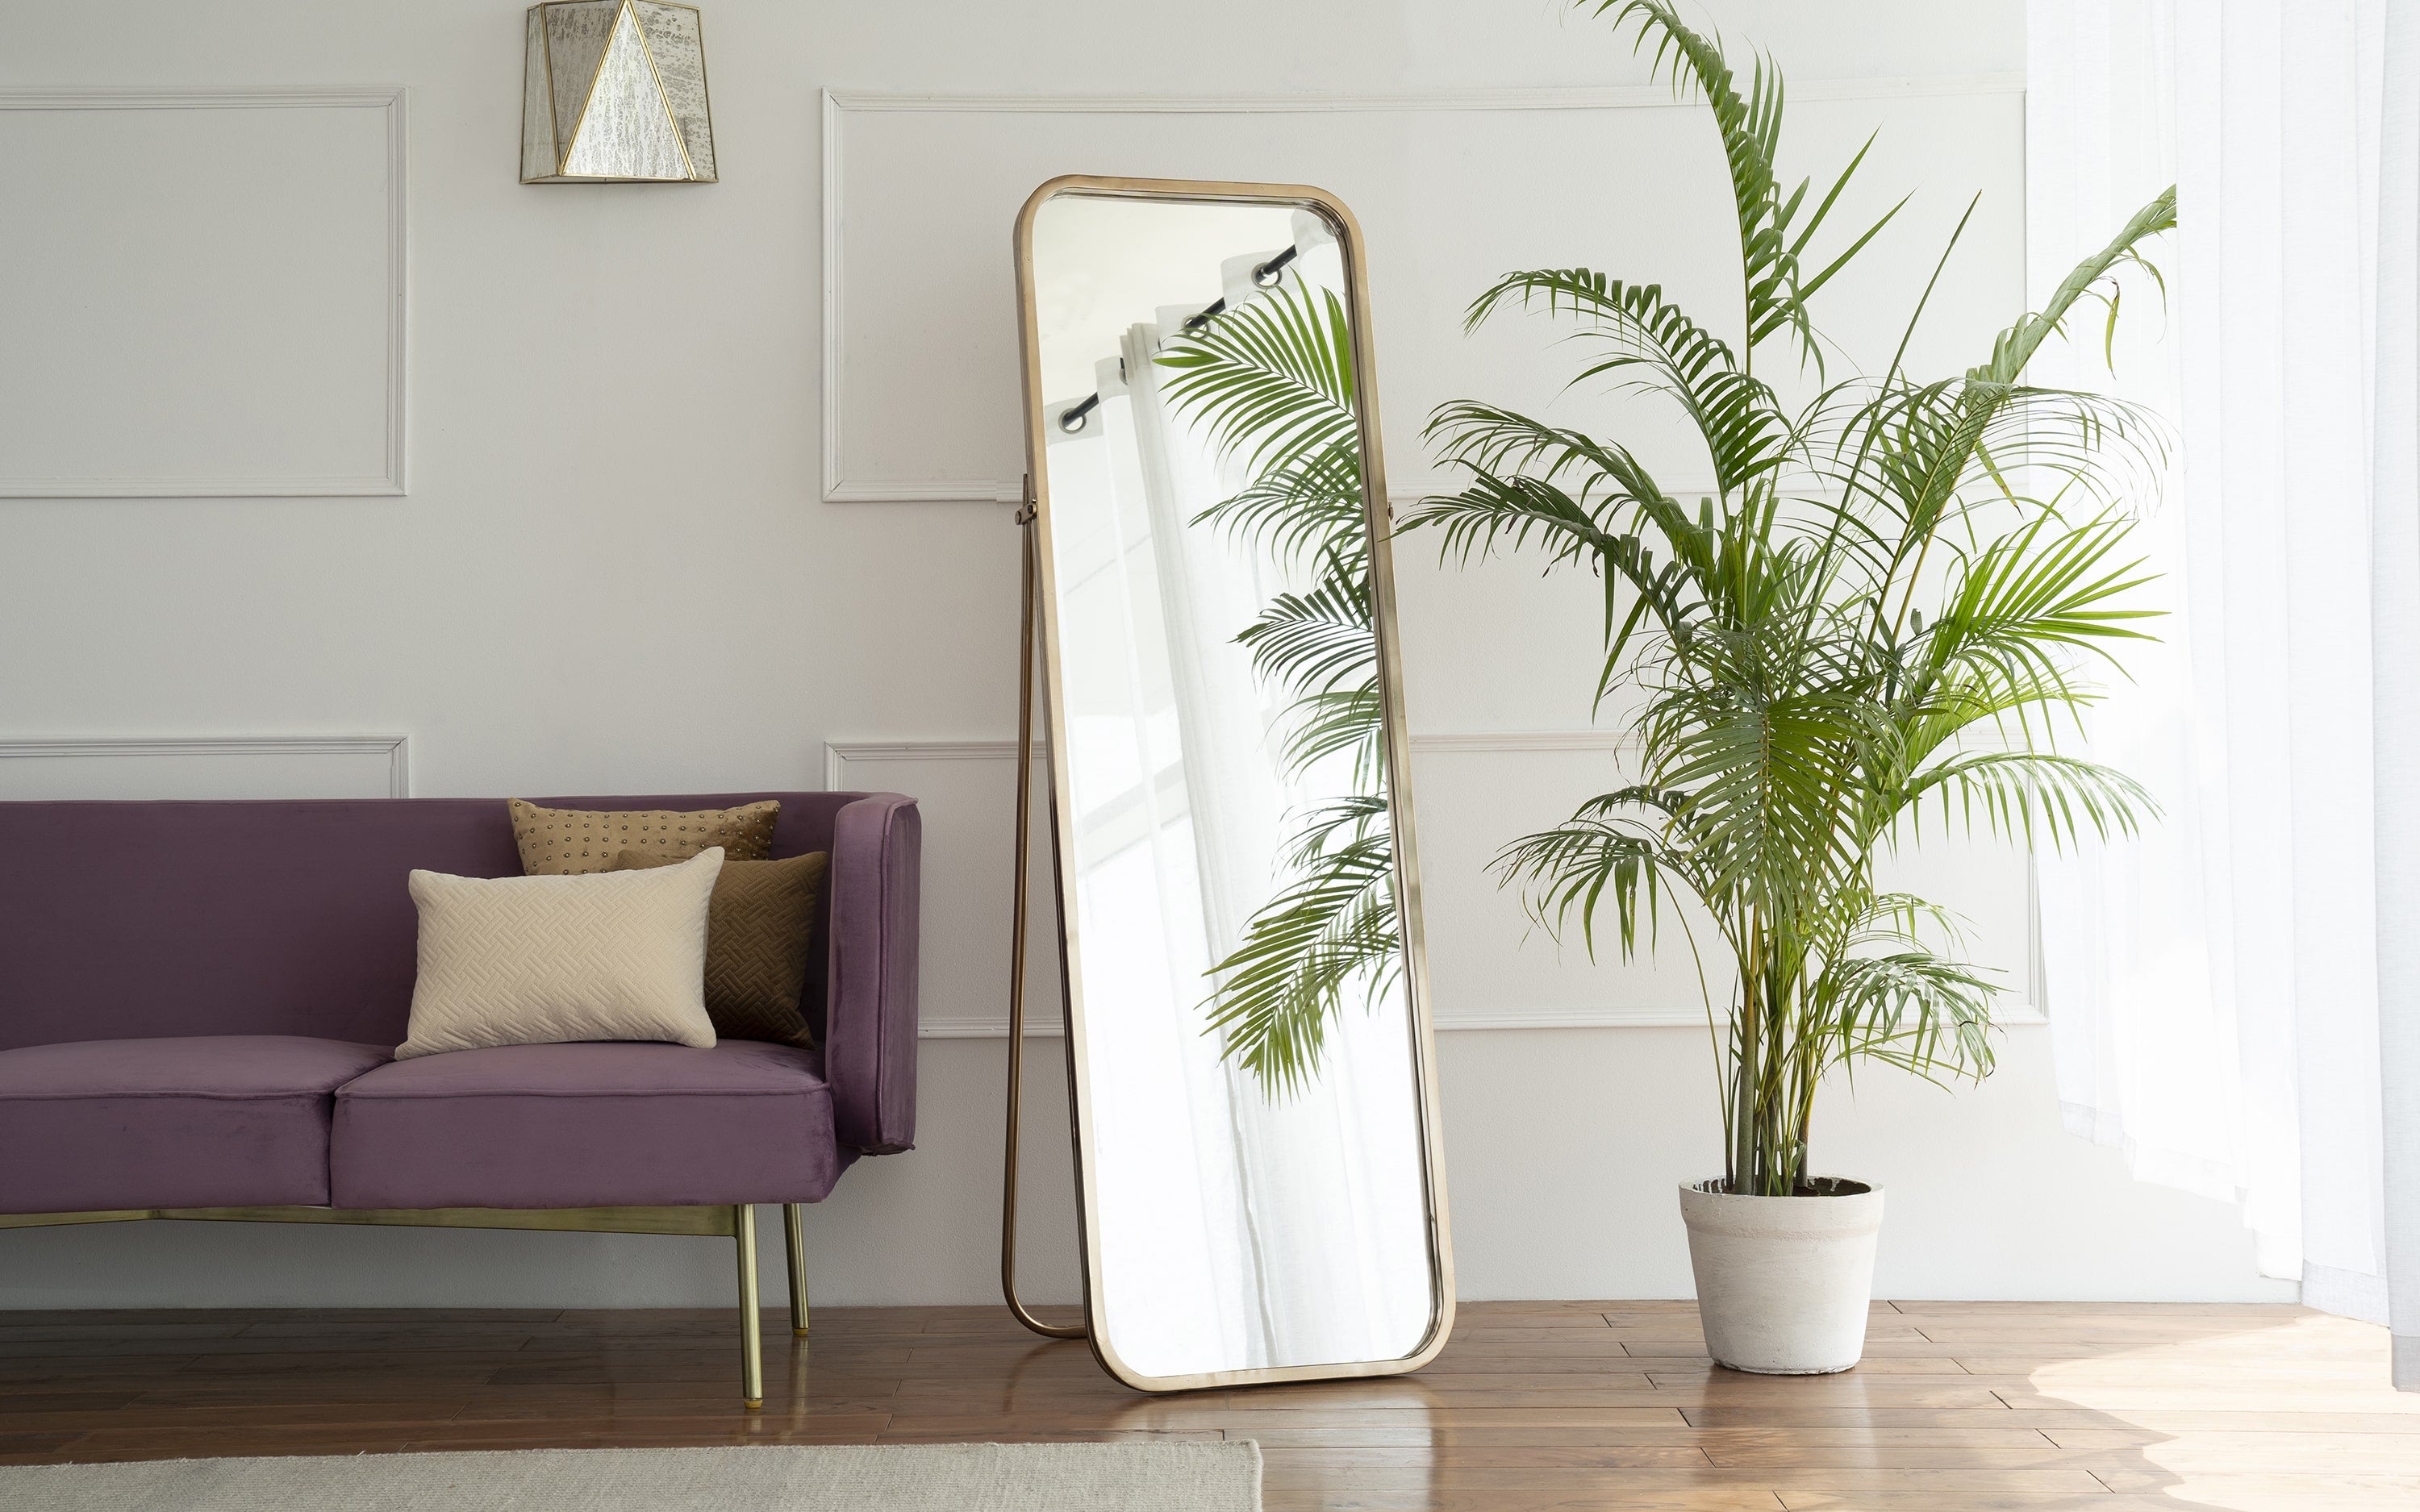 Yoho Floor Mirror made of Mirror & Metal with finish Gold